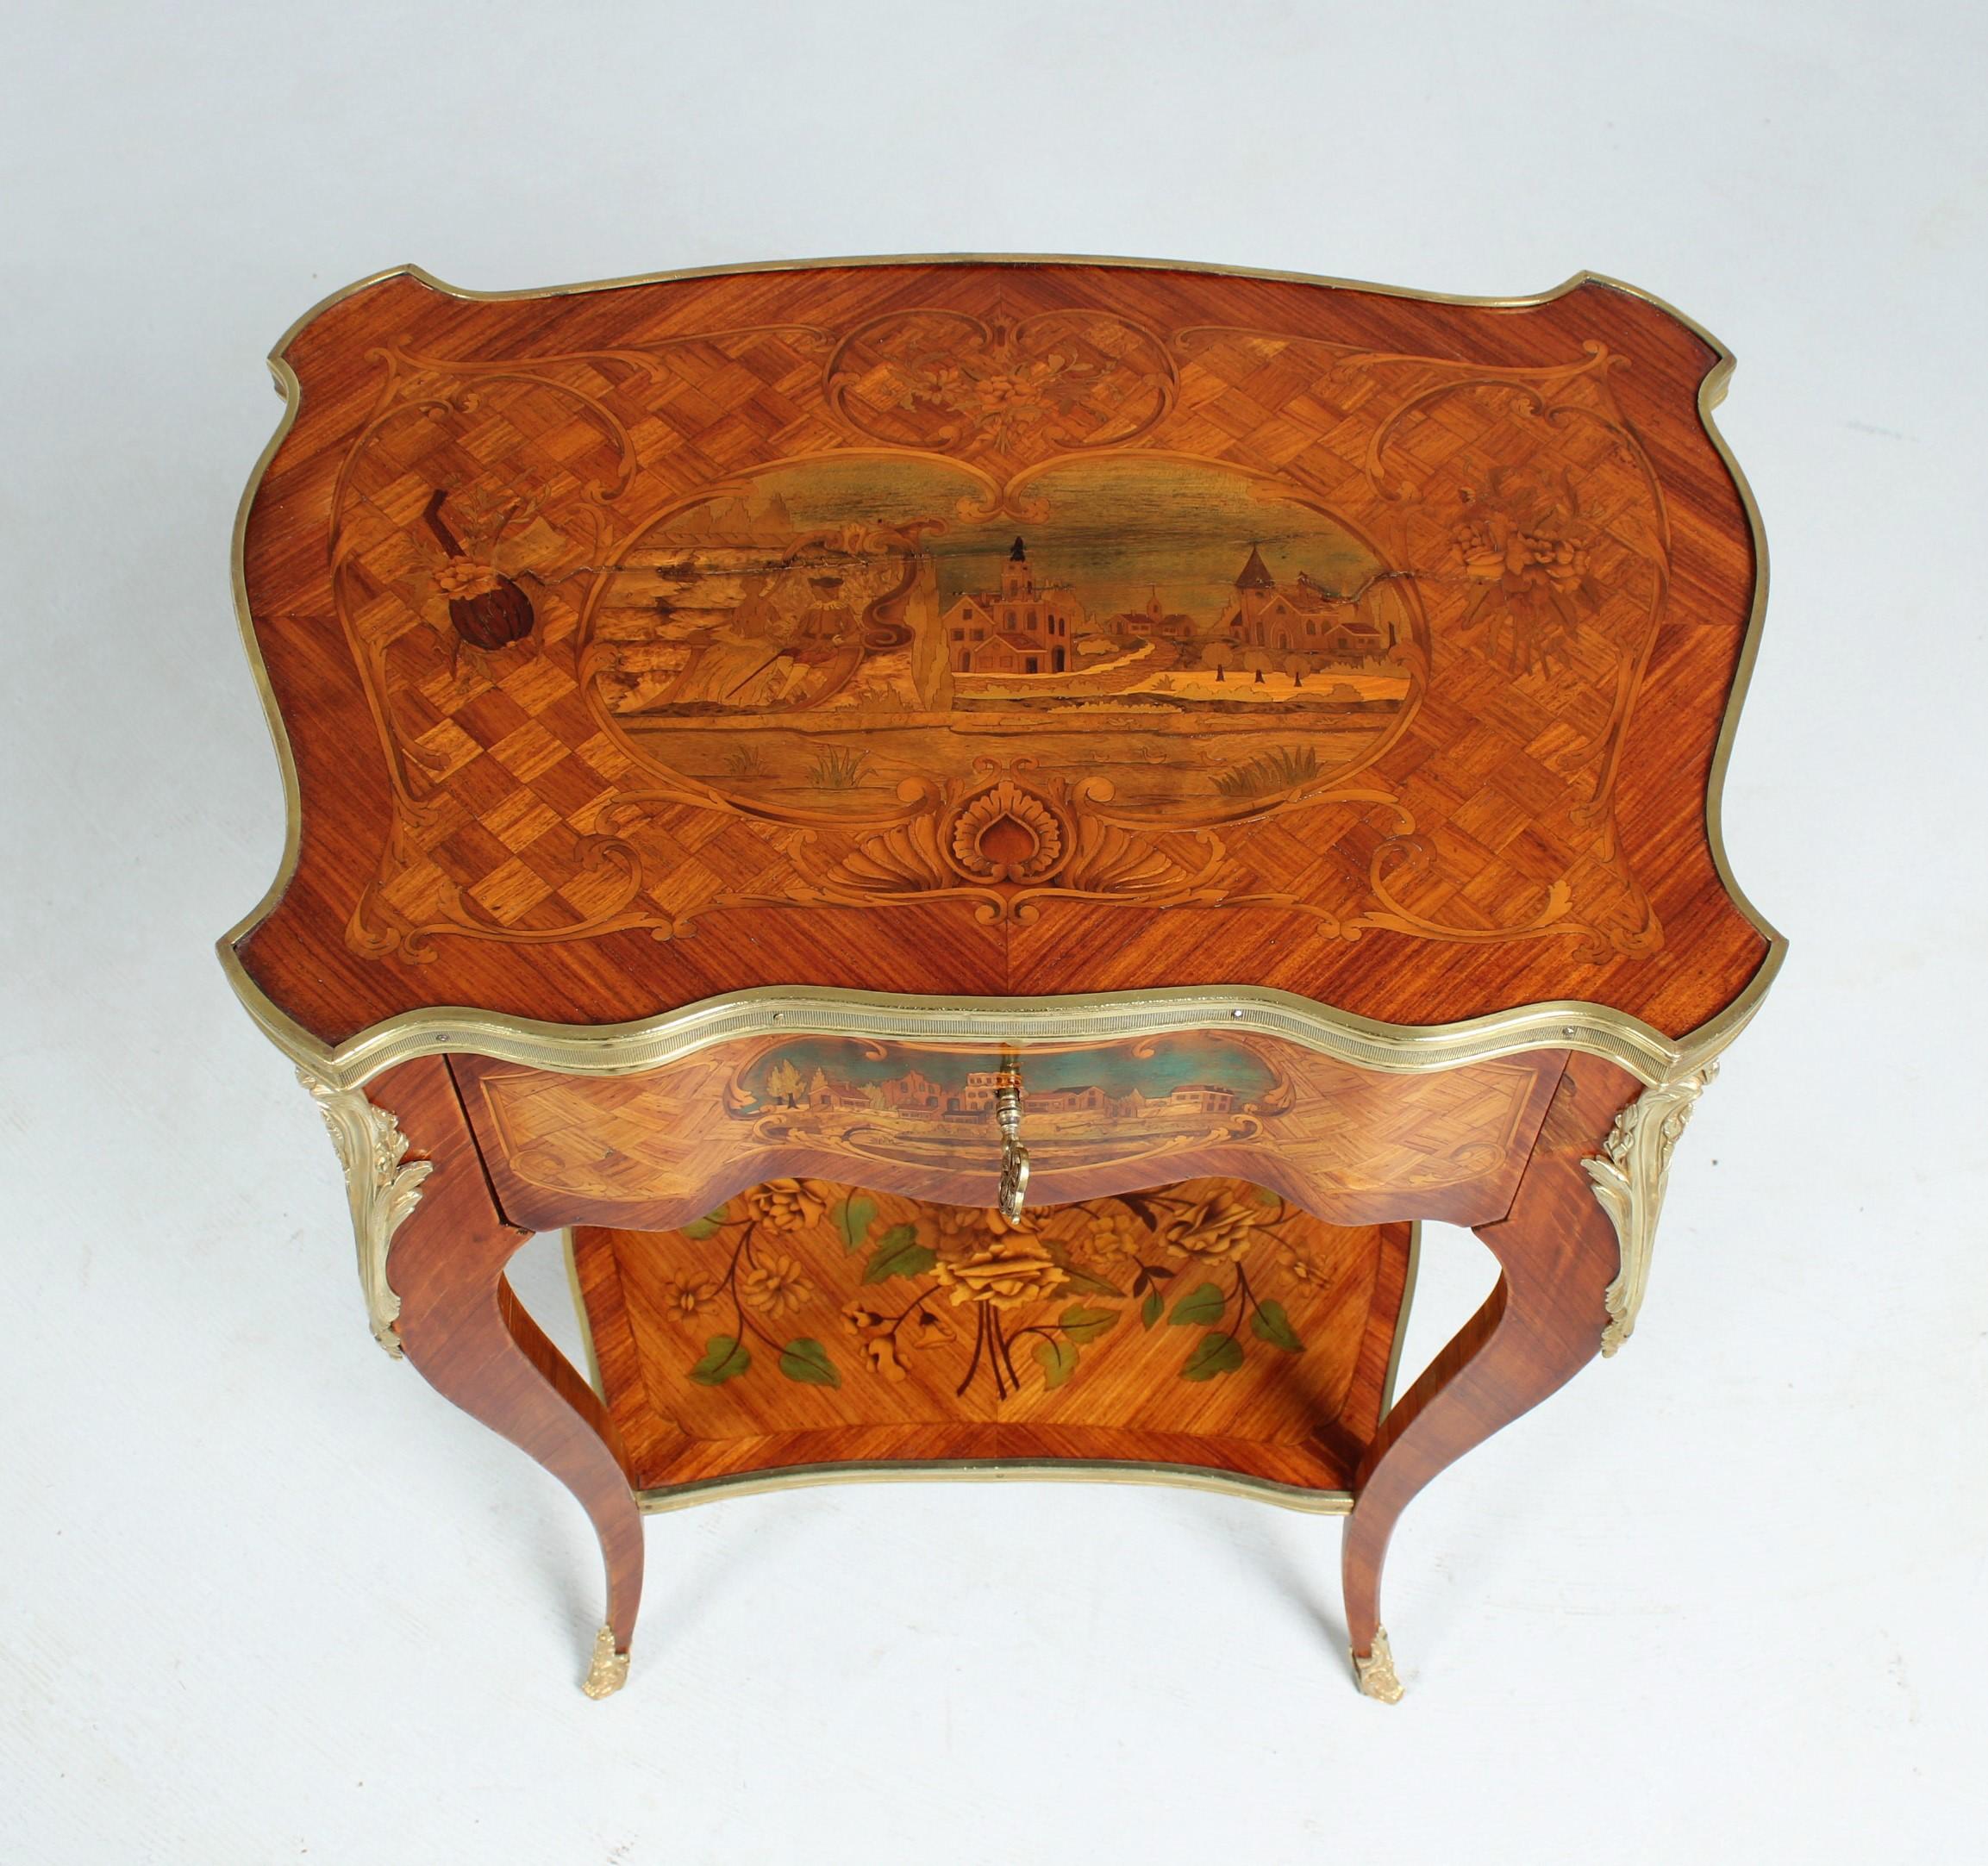  Ladies Desk with Fine Marquetry, Attributed to Beurdeley, Paris, circa 1880 In Good Condition For Sale In Greven, DE